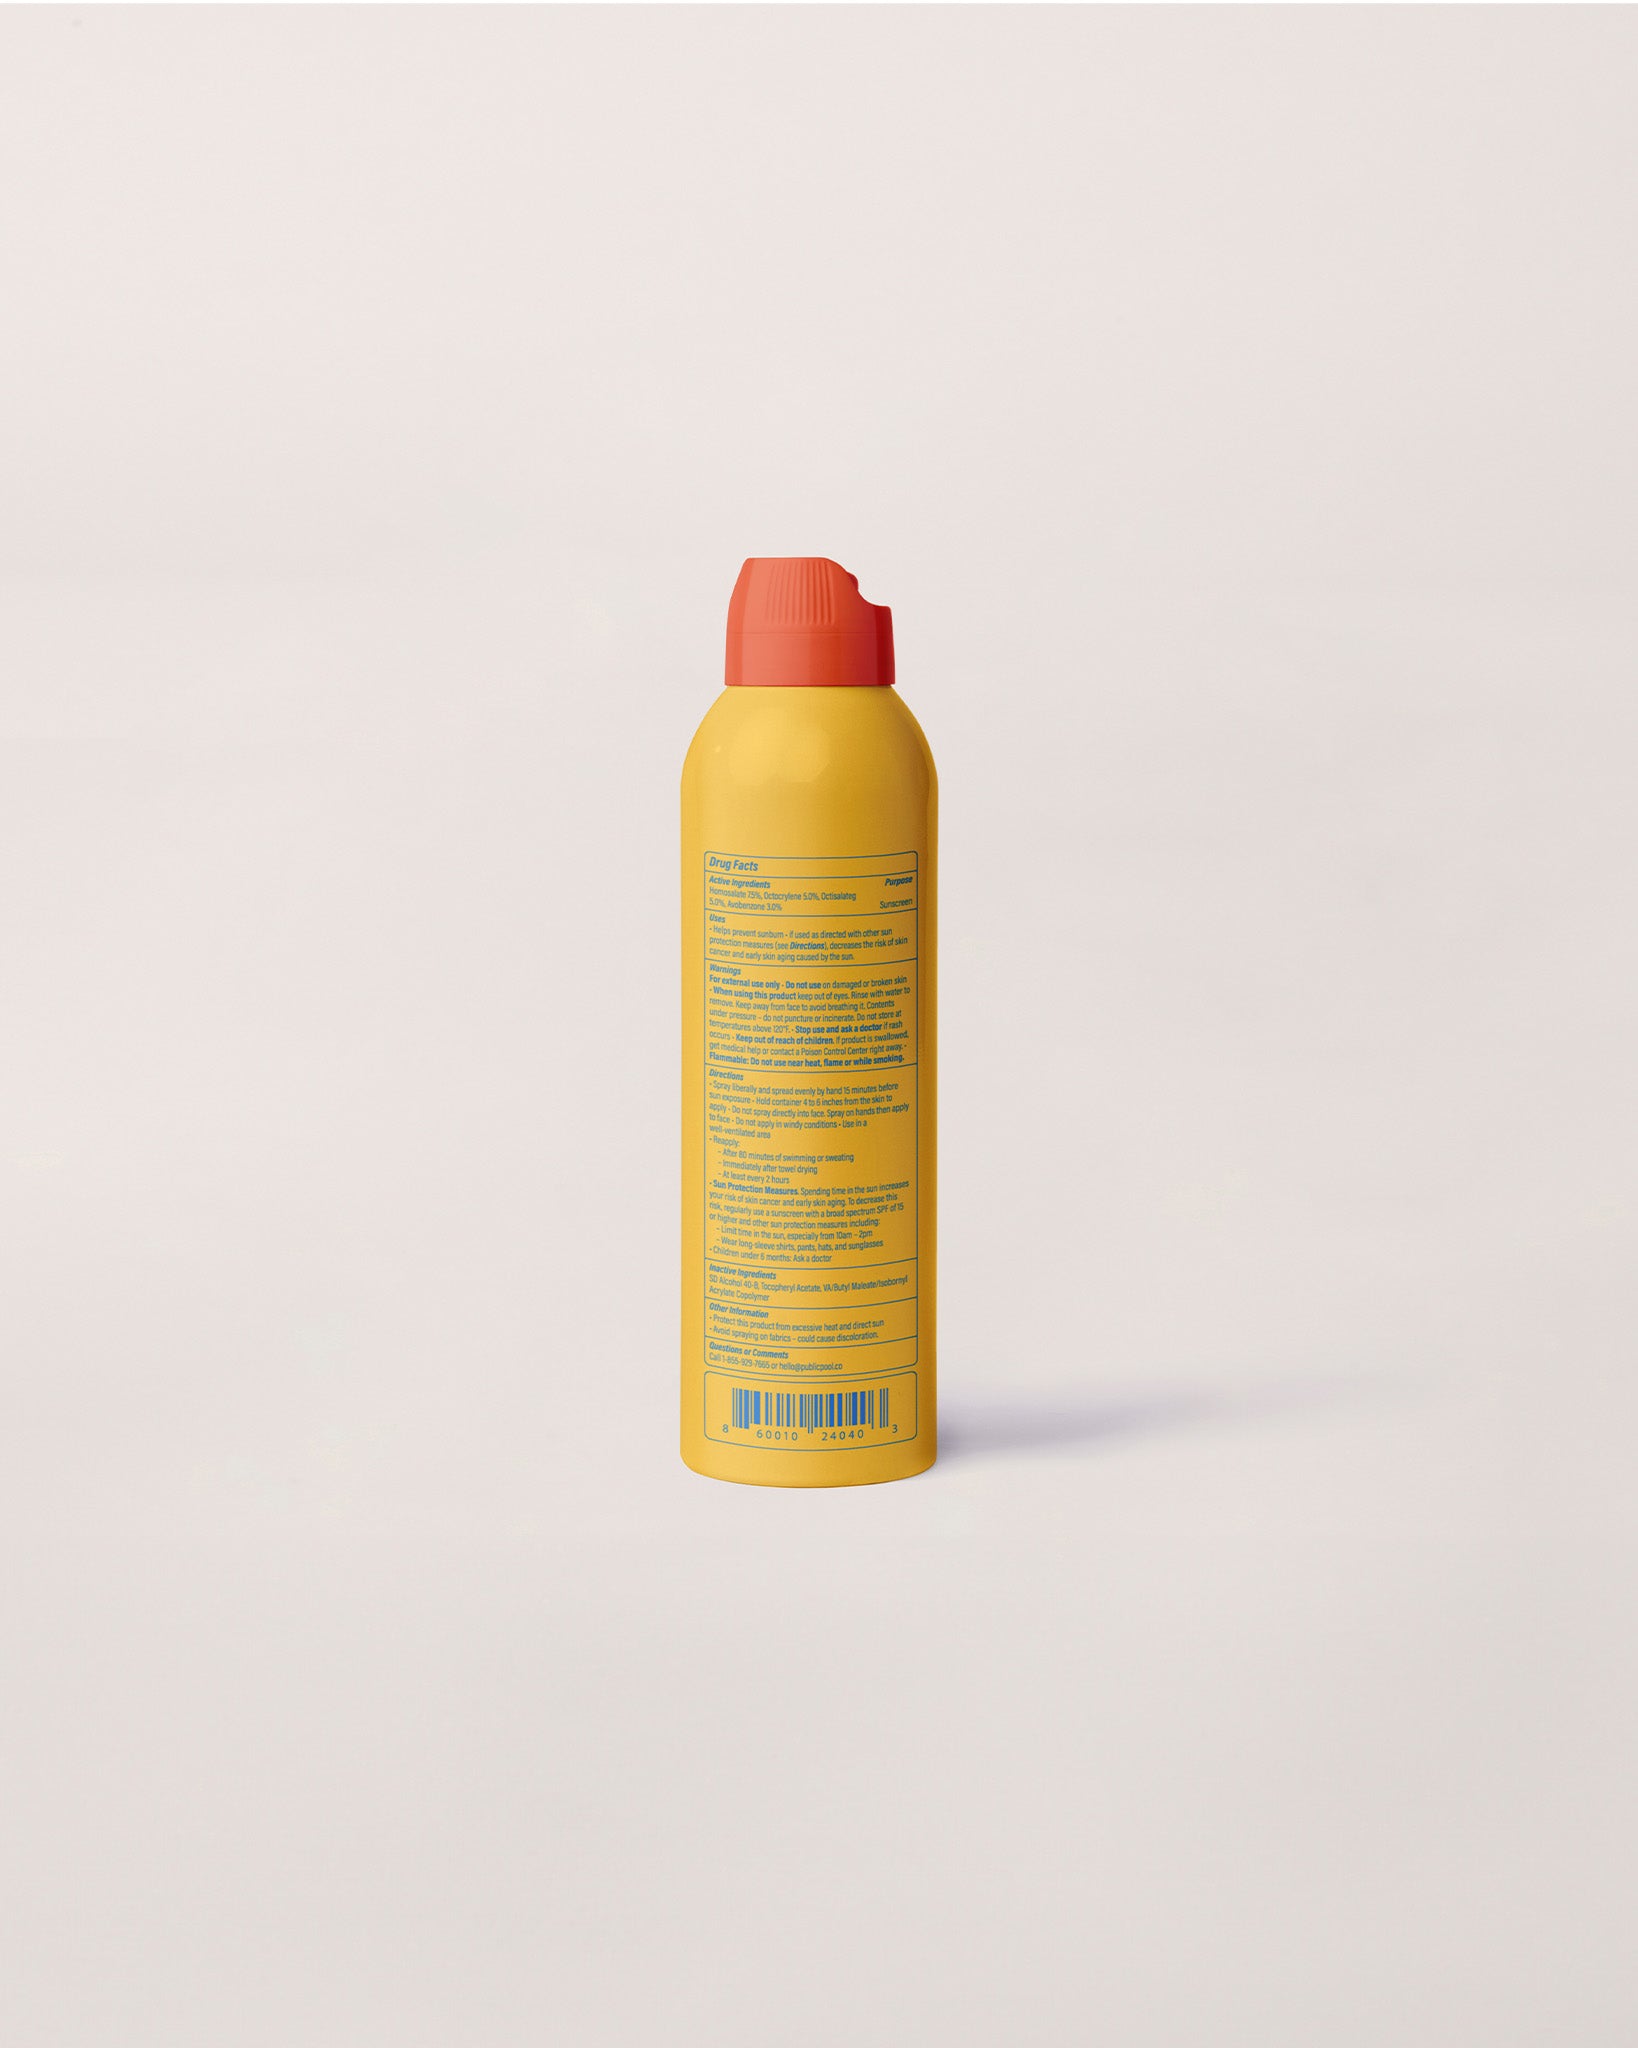 One side of a yellow sunscreen bottle. 